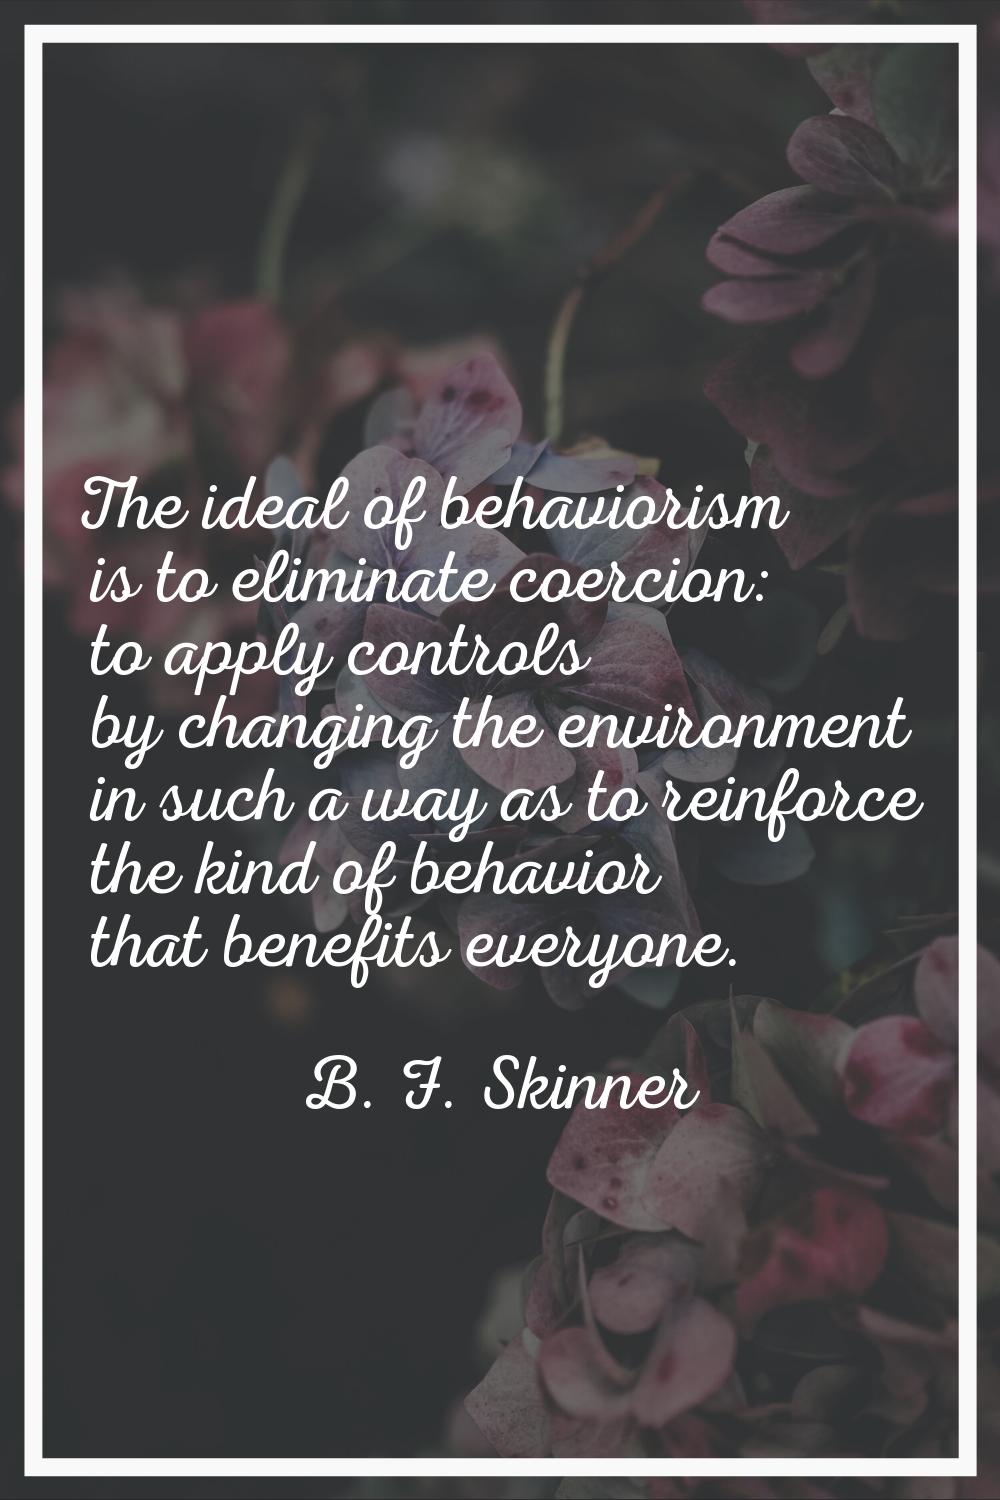 The ideal of behaviorism is to eliminate coercion: to apply controls by changing the environment in